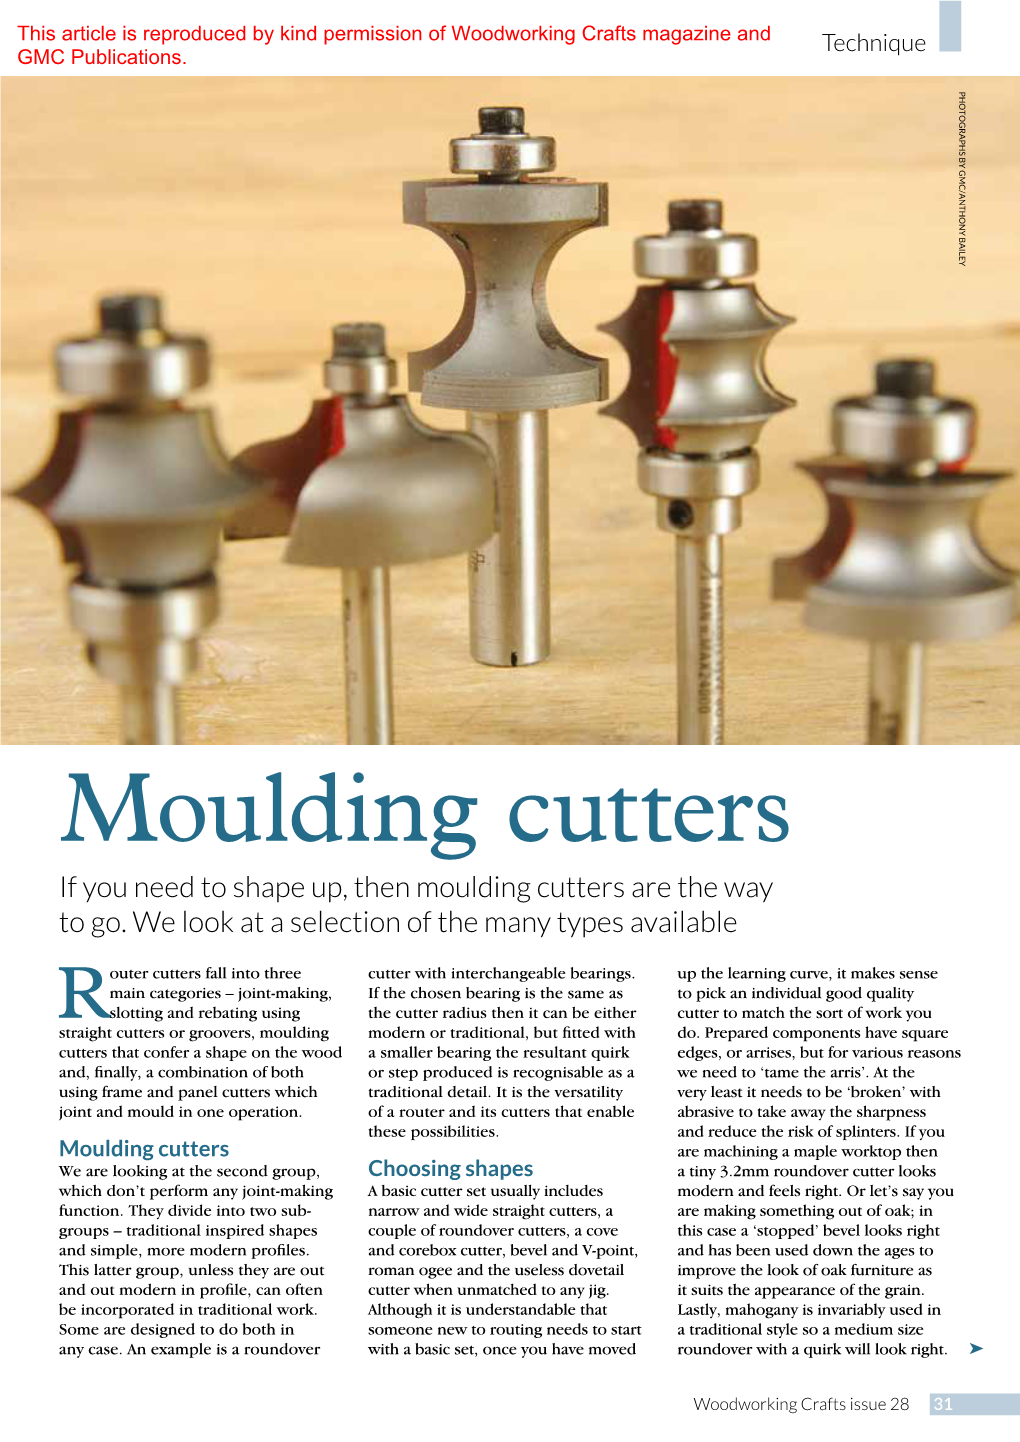 Moulding Cutters If You Need to Shape Up, Then Moulding Cutters Are the Way to Go